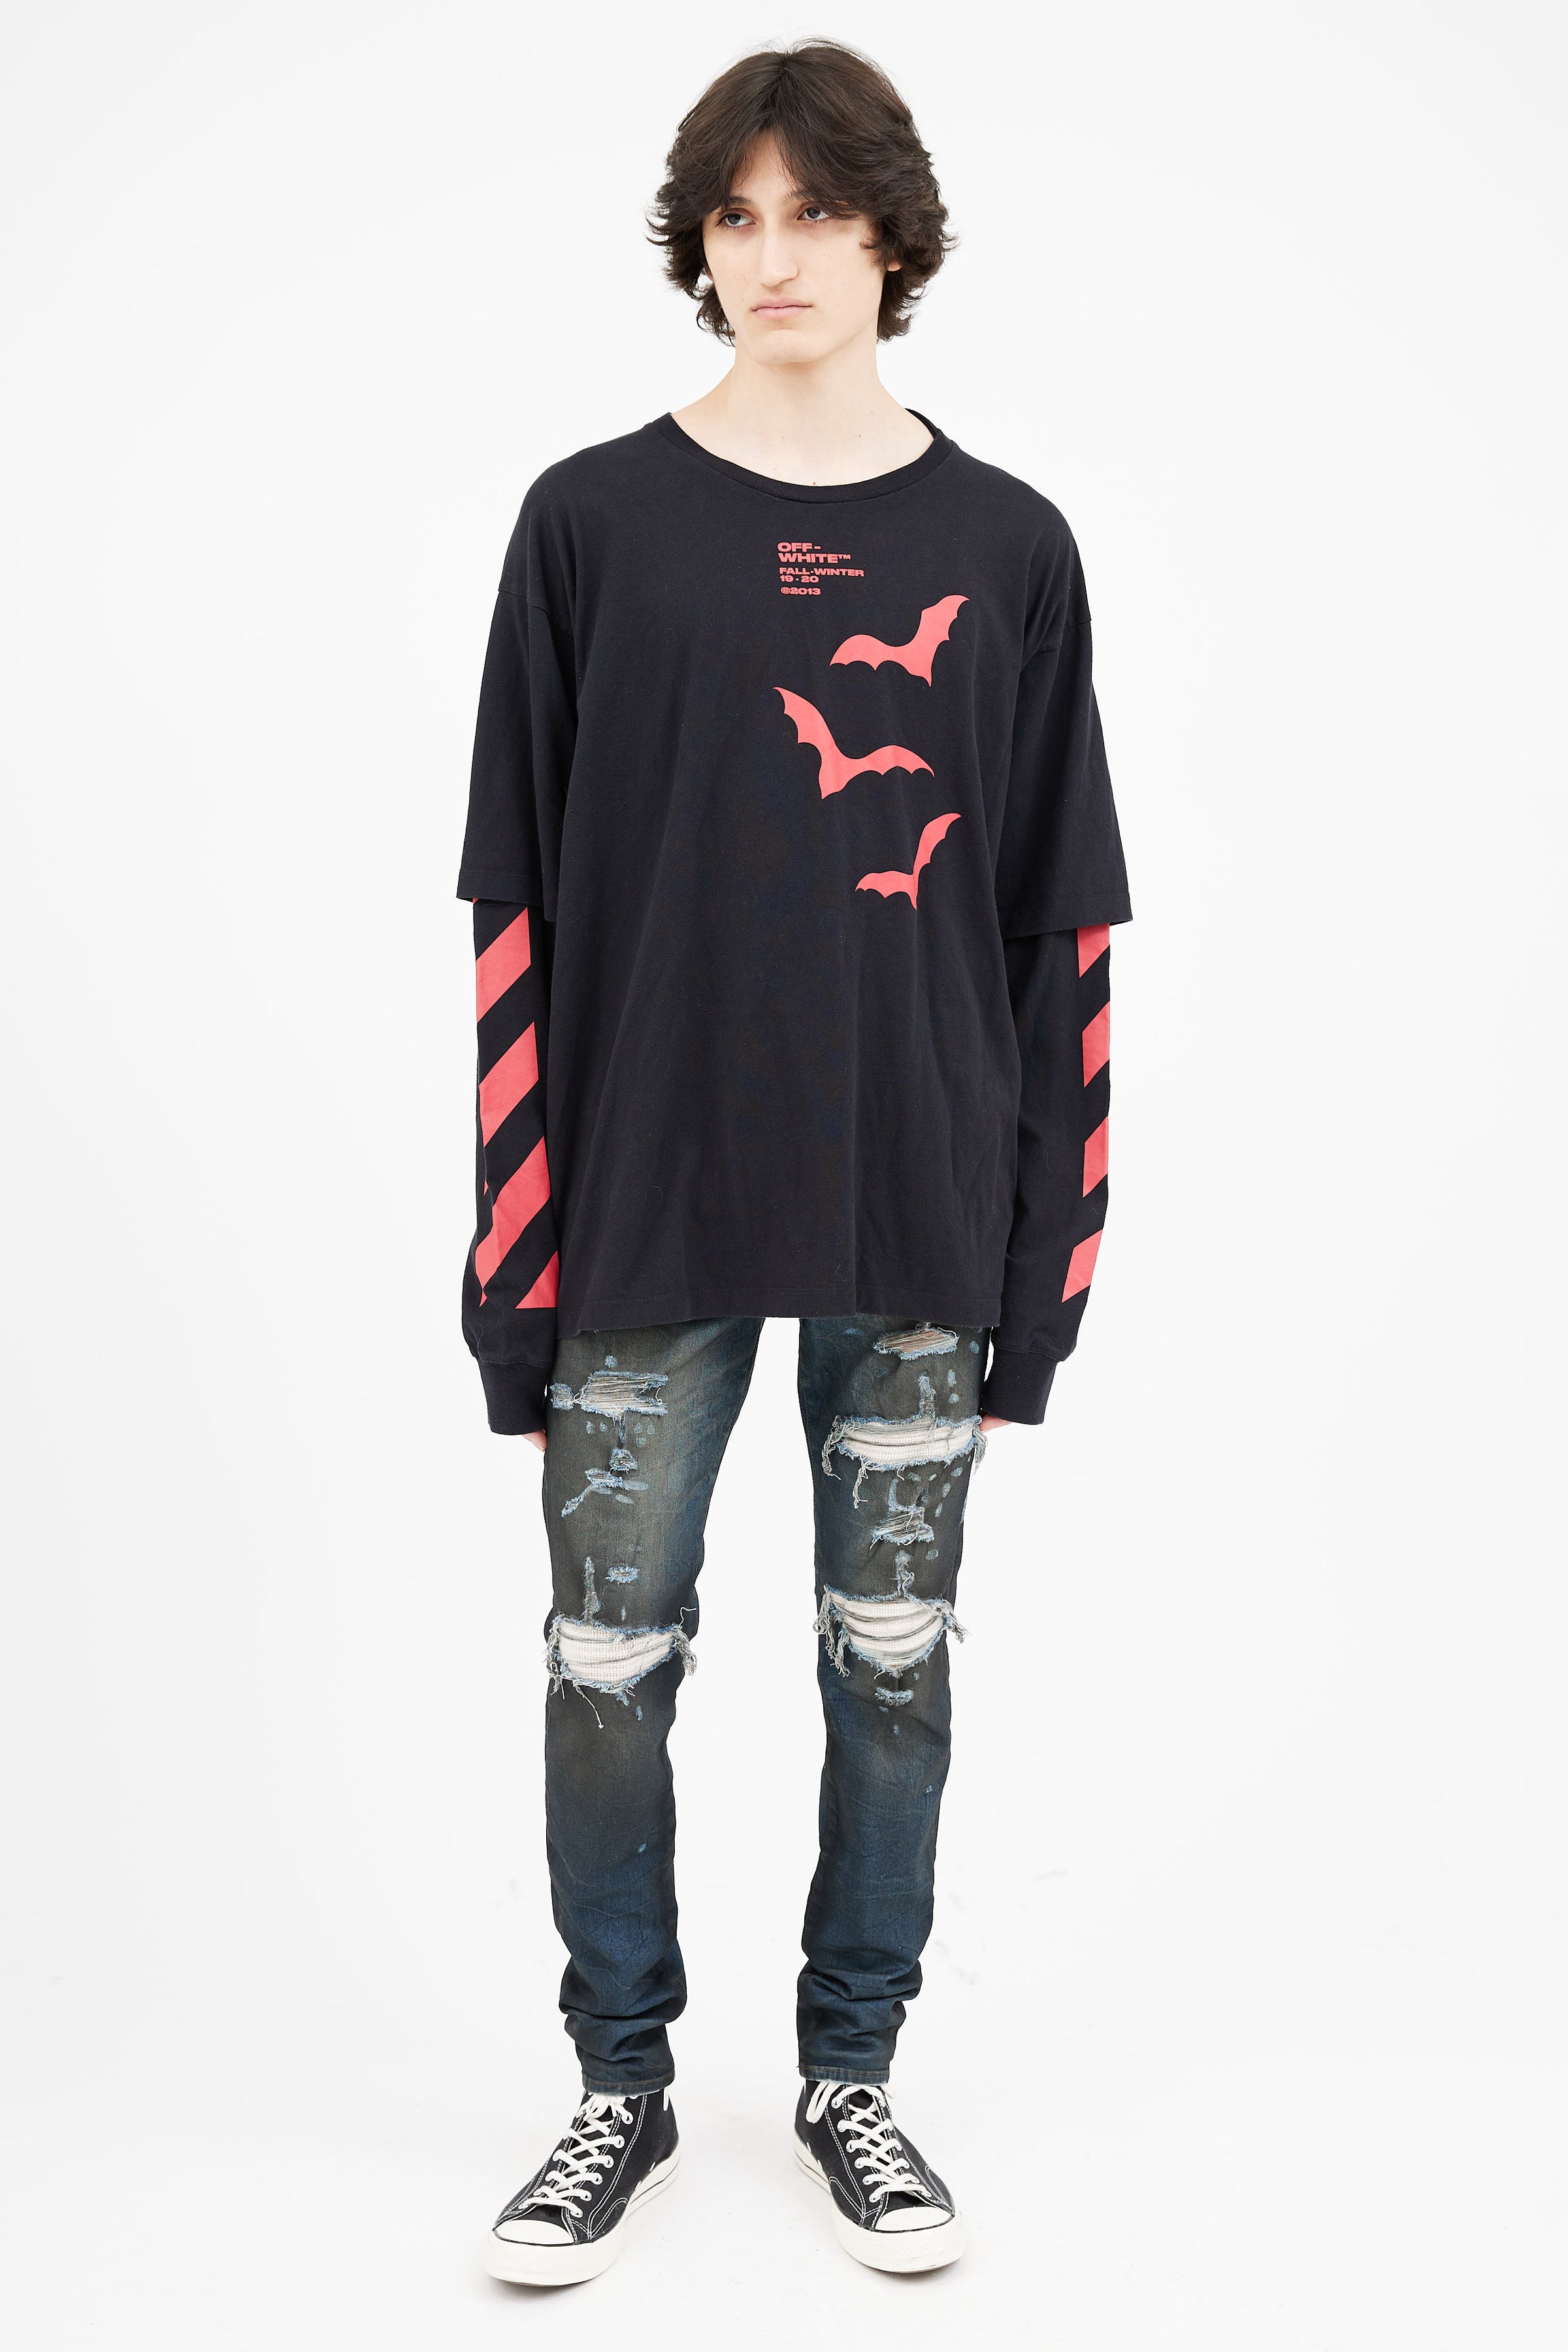 Off-White FW 2019 Black & Red Print Layered T-Shirt – Consignment